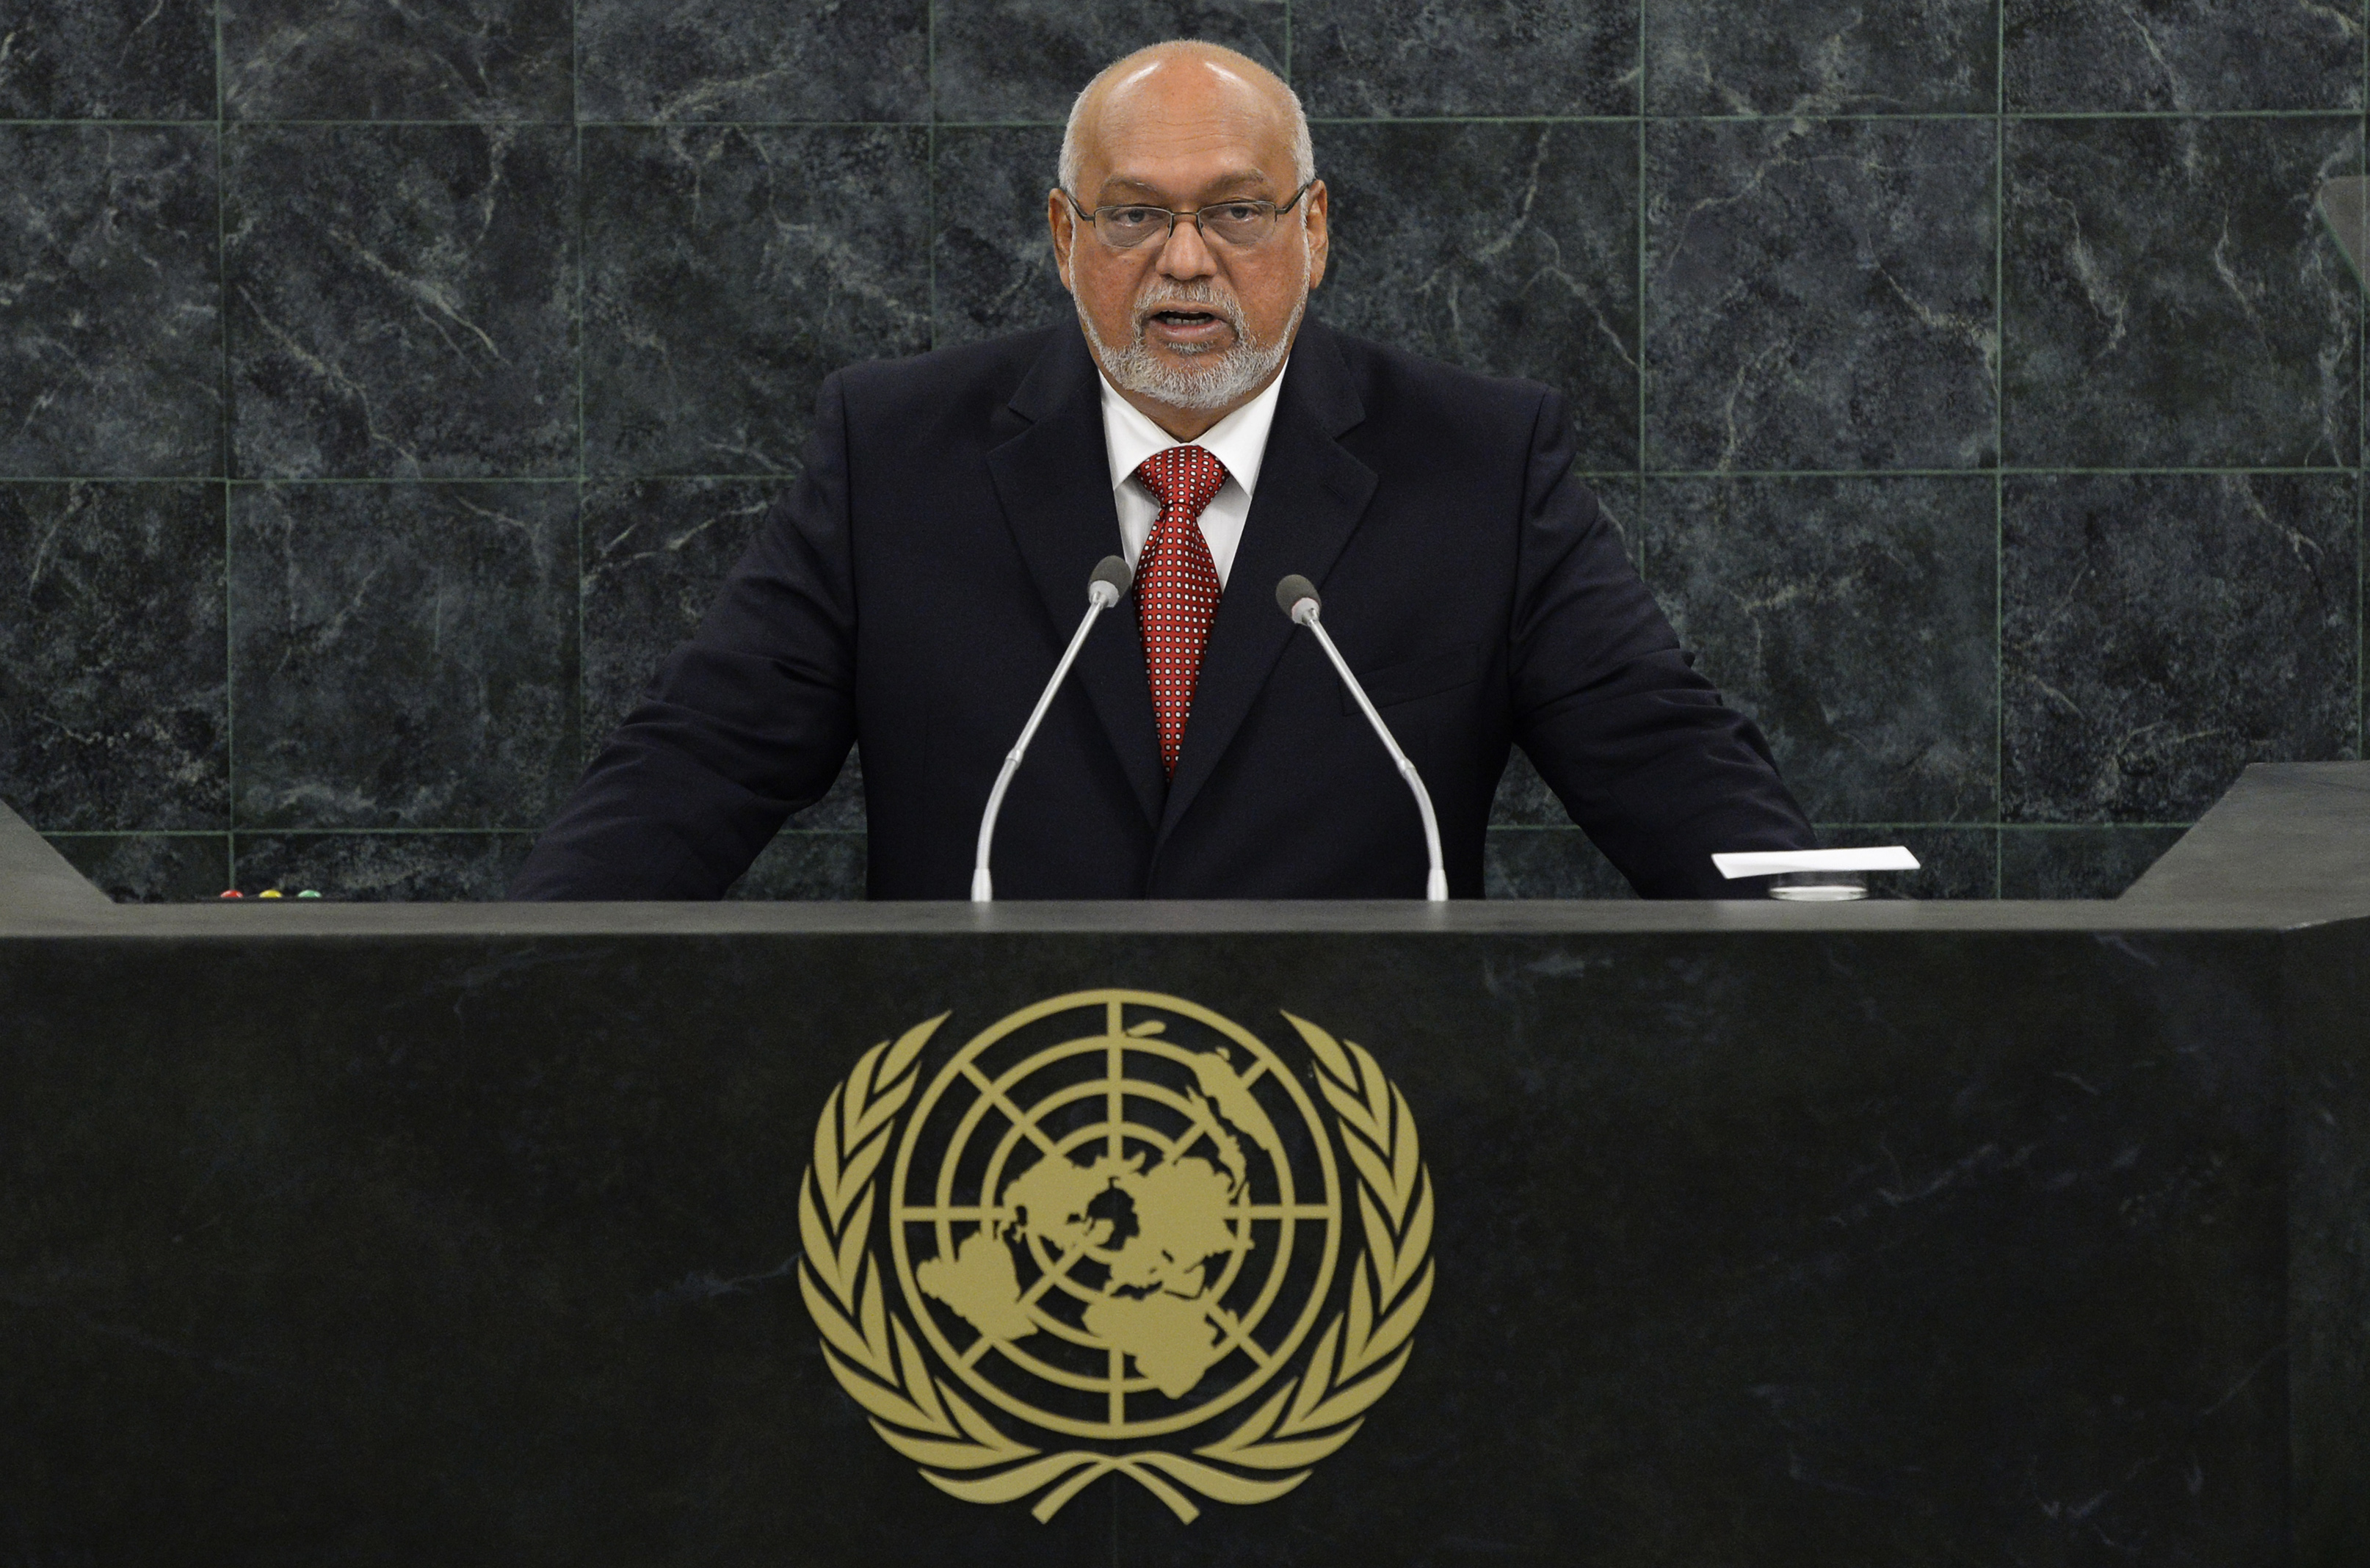 Donald Rabindranauth Ramotar, President of the Republic of Guyana, addresses the 68th United Nations General Assembly at U.N. headquarters in New York